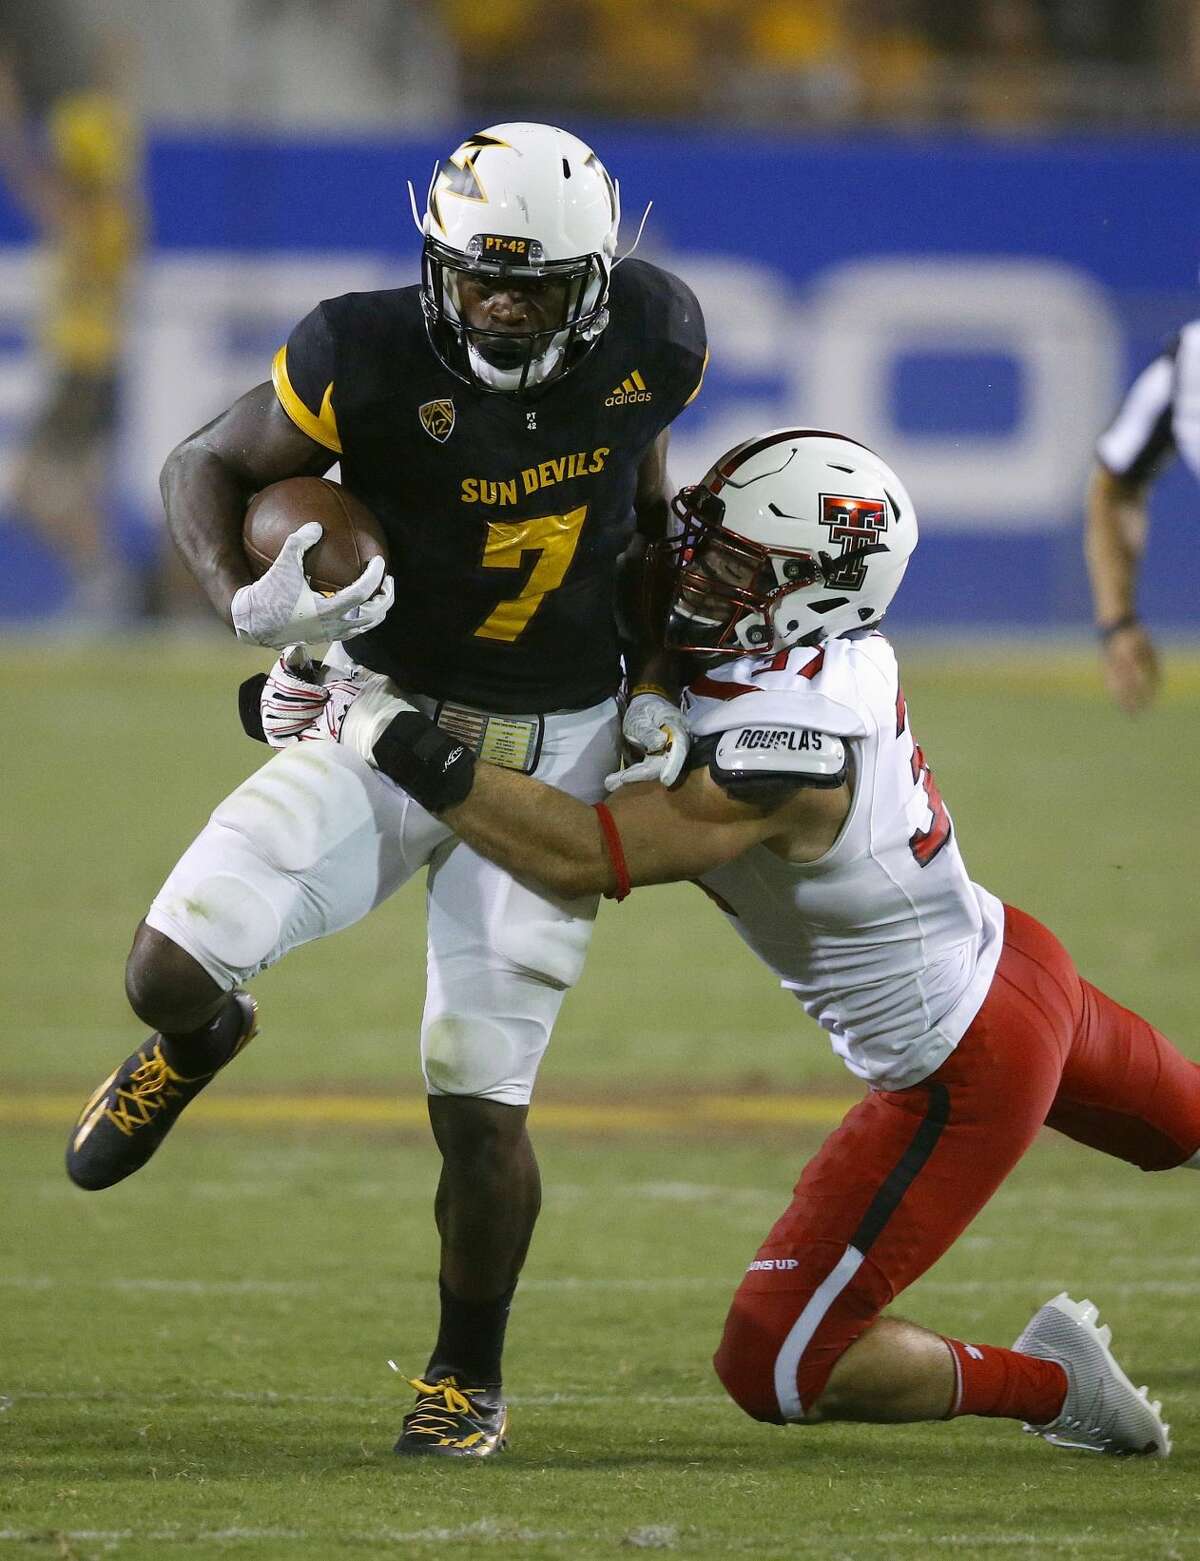 Arizona State's Kalen Ballage (7) runs with the ball as Texas Tech's Luke Stice, right, comes in for the tackle during the second half of an NCAA college football game Saturday, Sept. 10, 2016, in Tempe, Ariz. Arizona State defeated Texas Tech 68-55. (AP Photo/Ross D. Franklin)